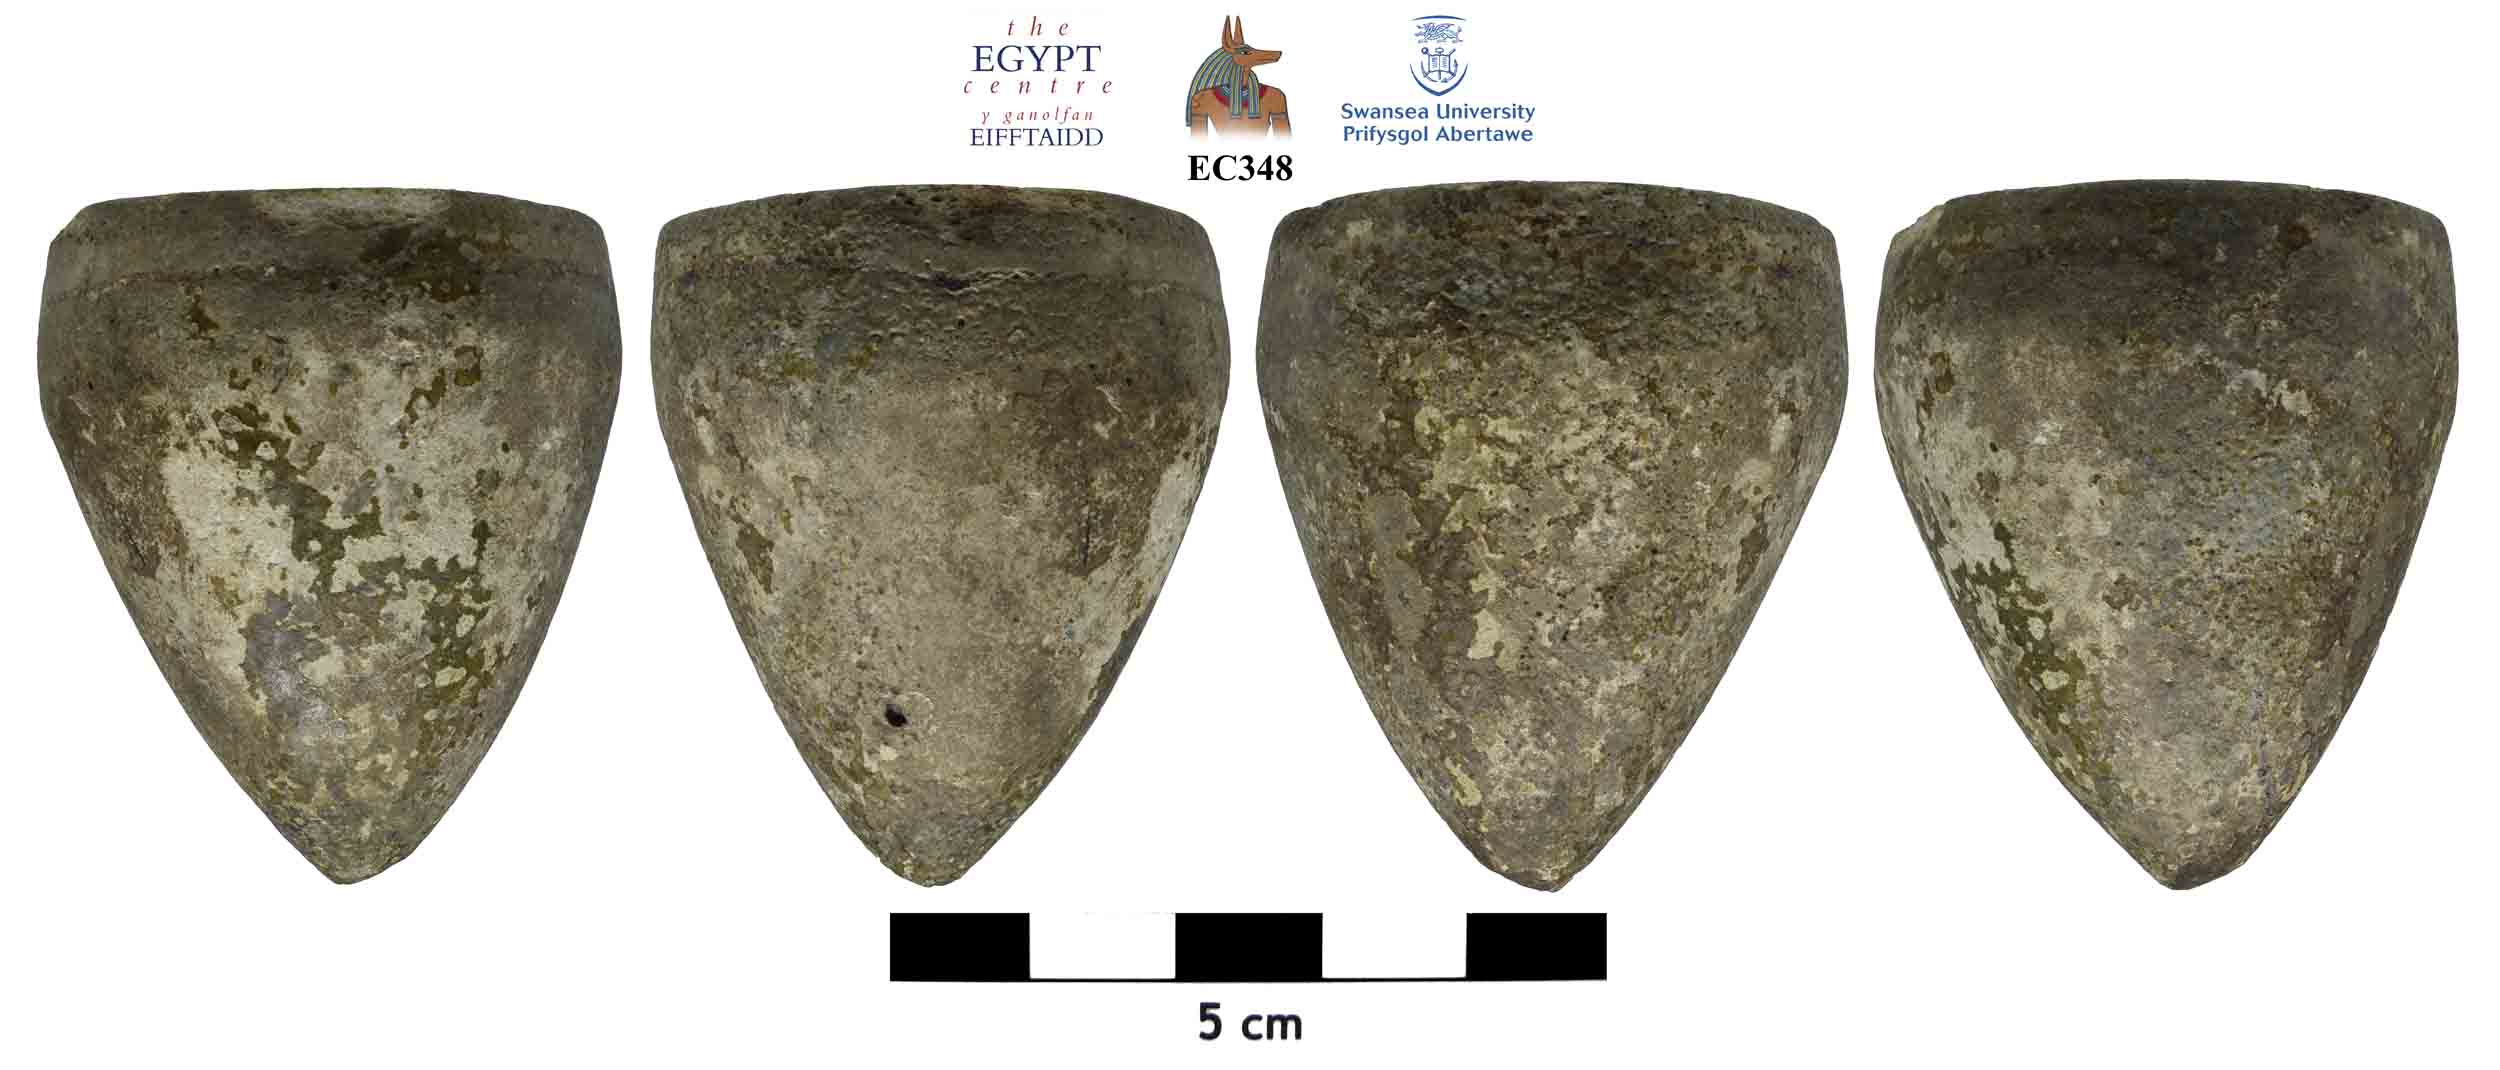 Image for: Conical stone object